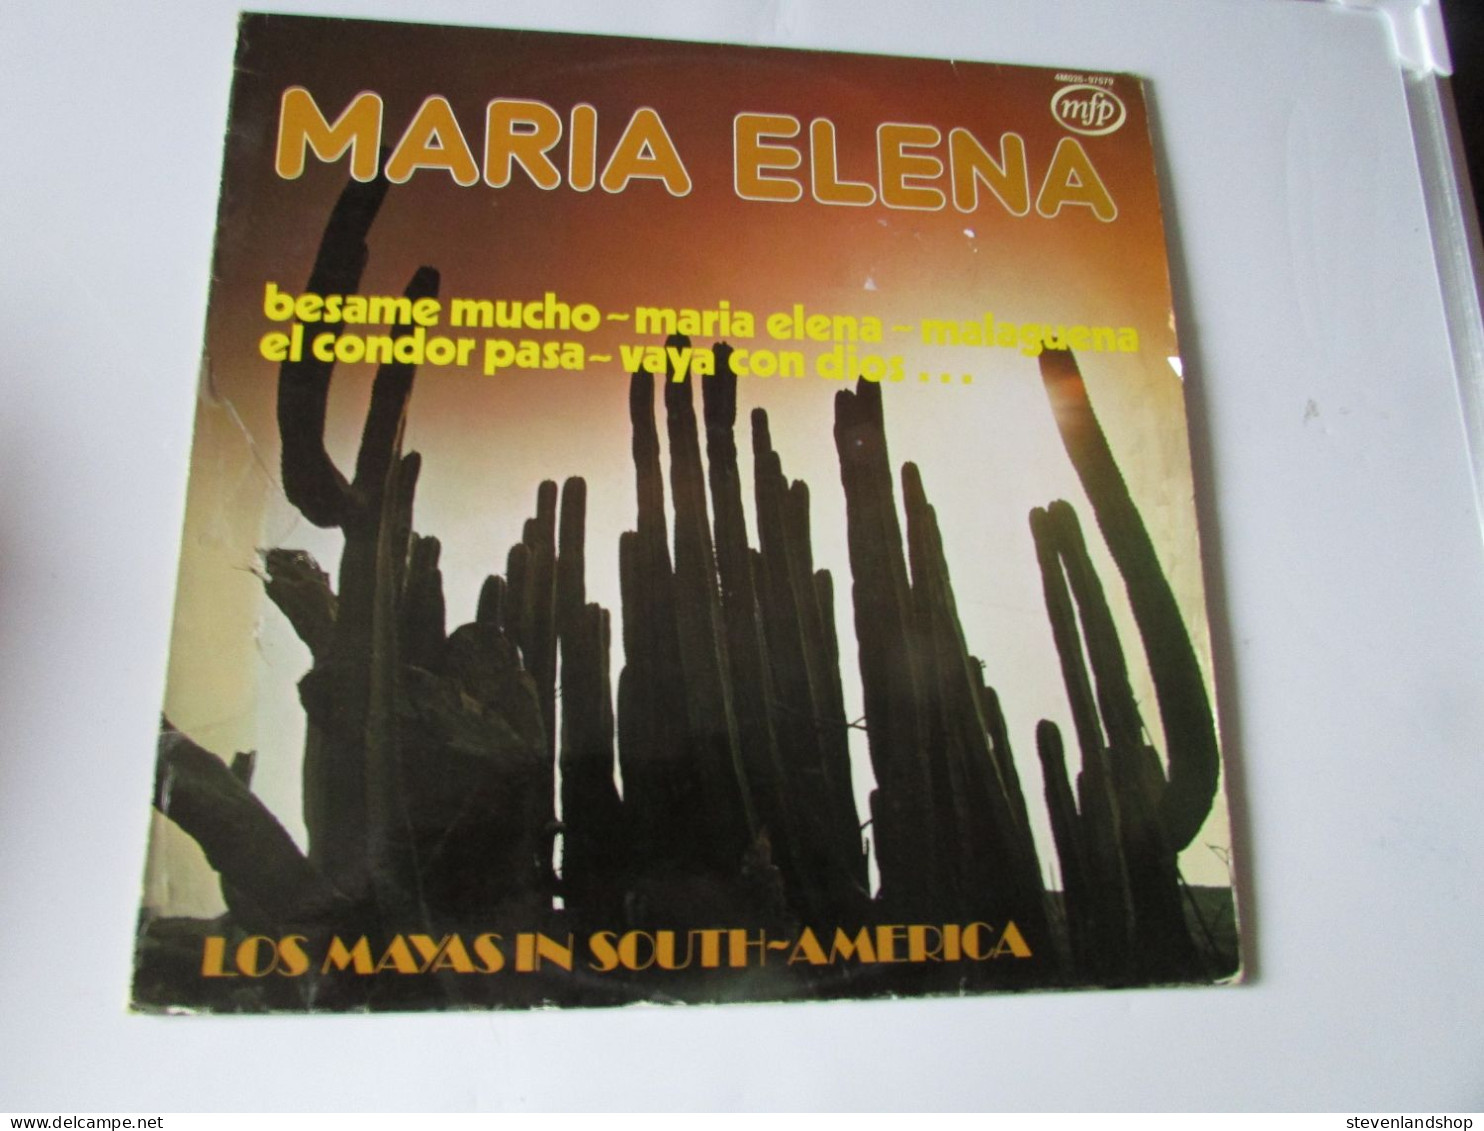 LOS MAYAS IN SOUTH - AMERICA, MARIA ELENA, LP - Other - Spanish Music